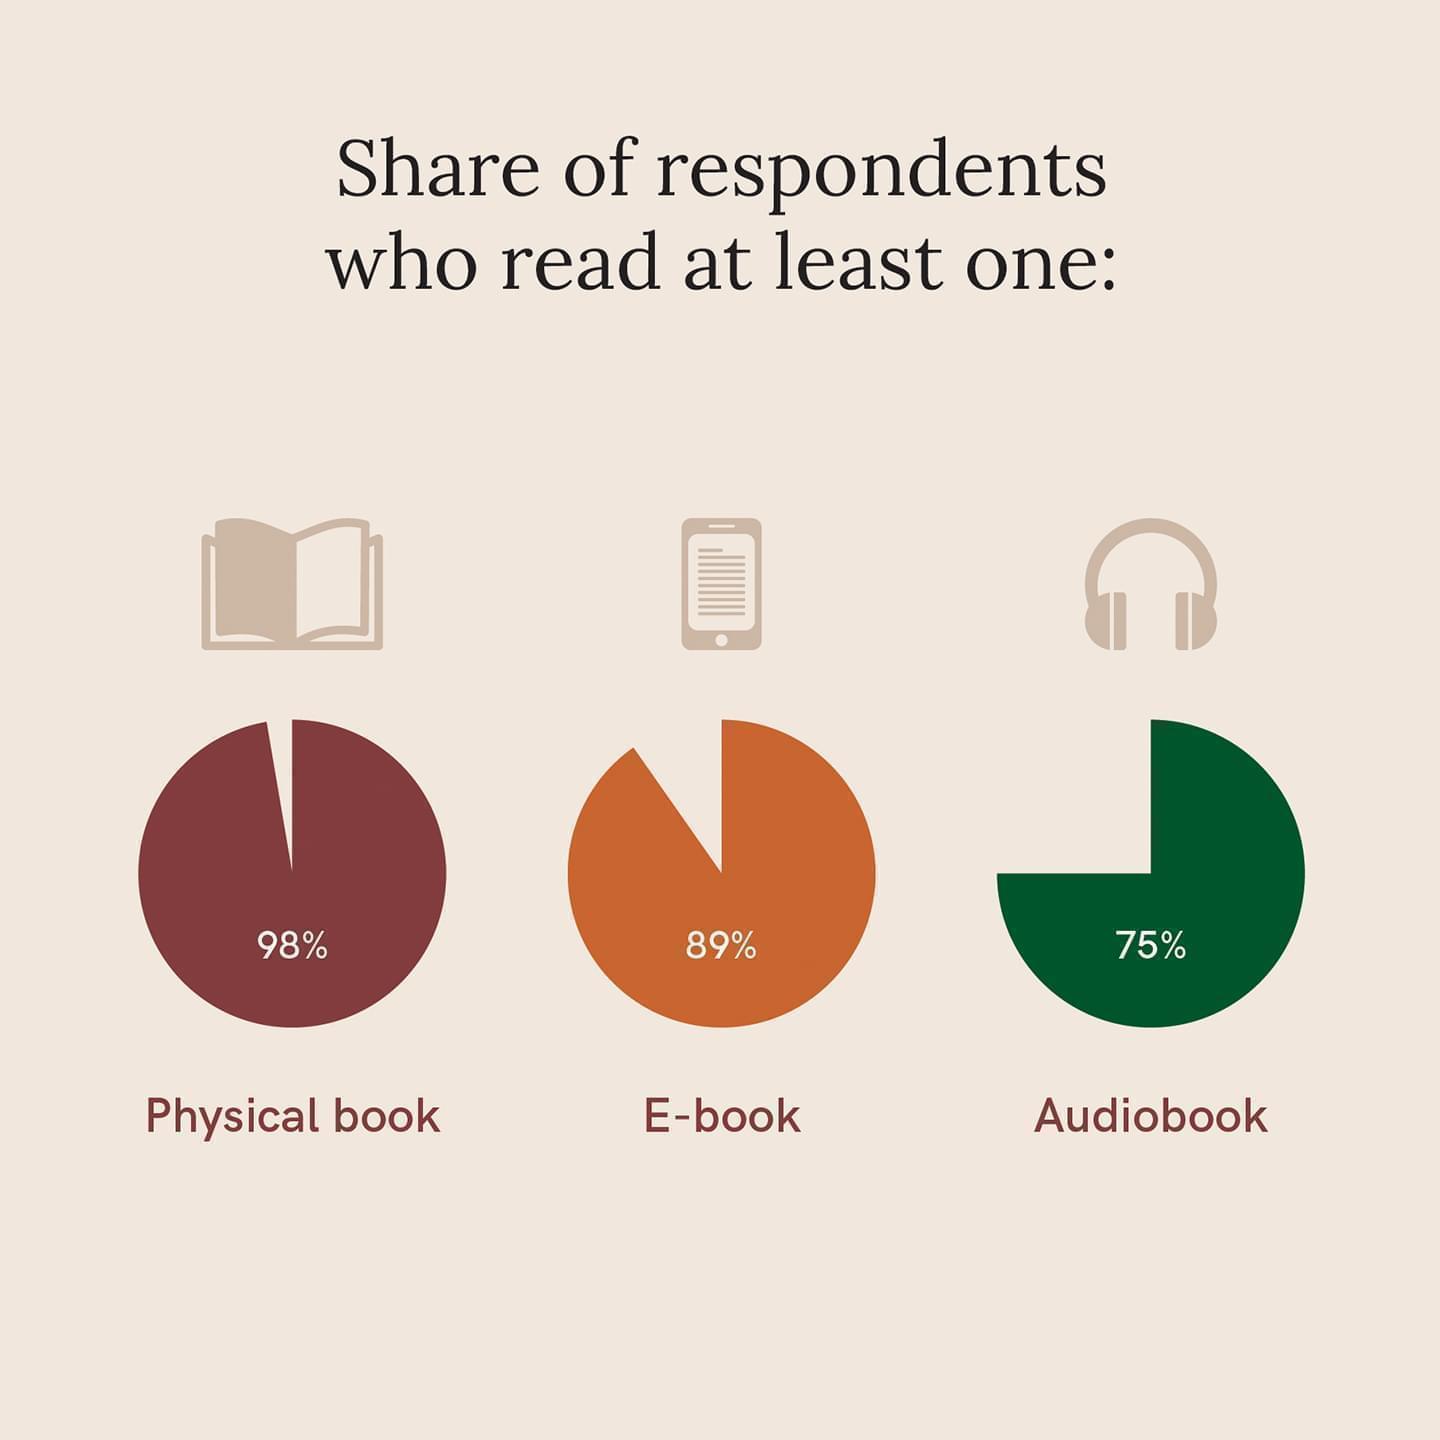 A series of pie charts taken from survey results showing the share of respondents who read from which book formats